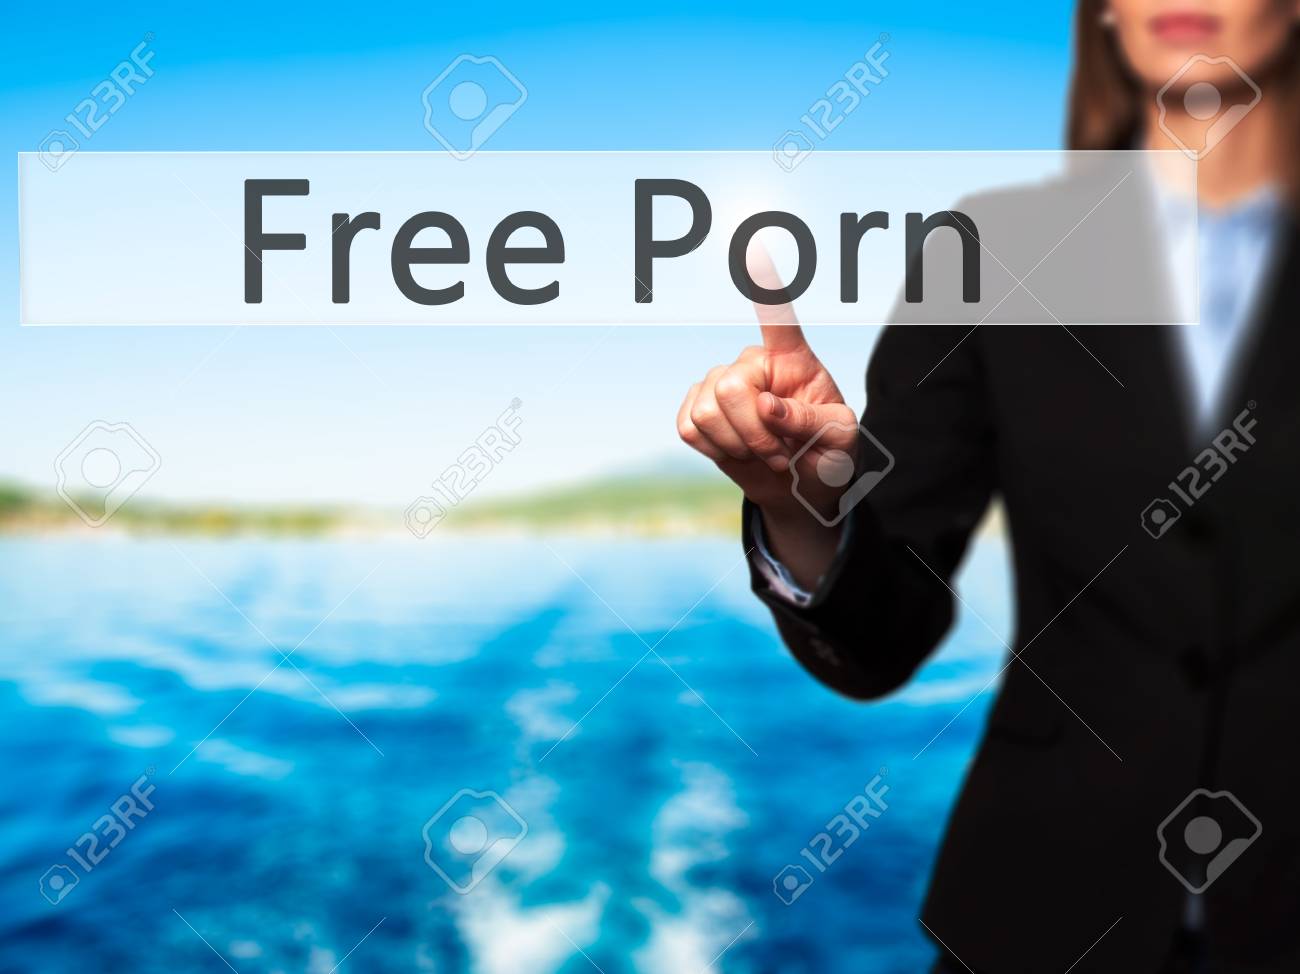 biplab mallick recommends free i touch porn pic